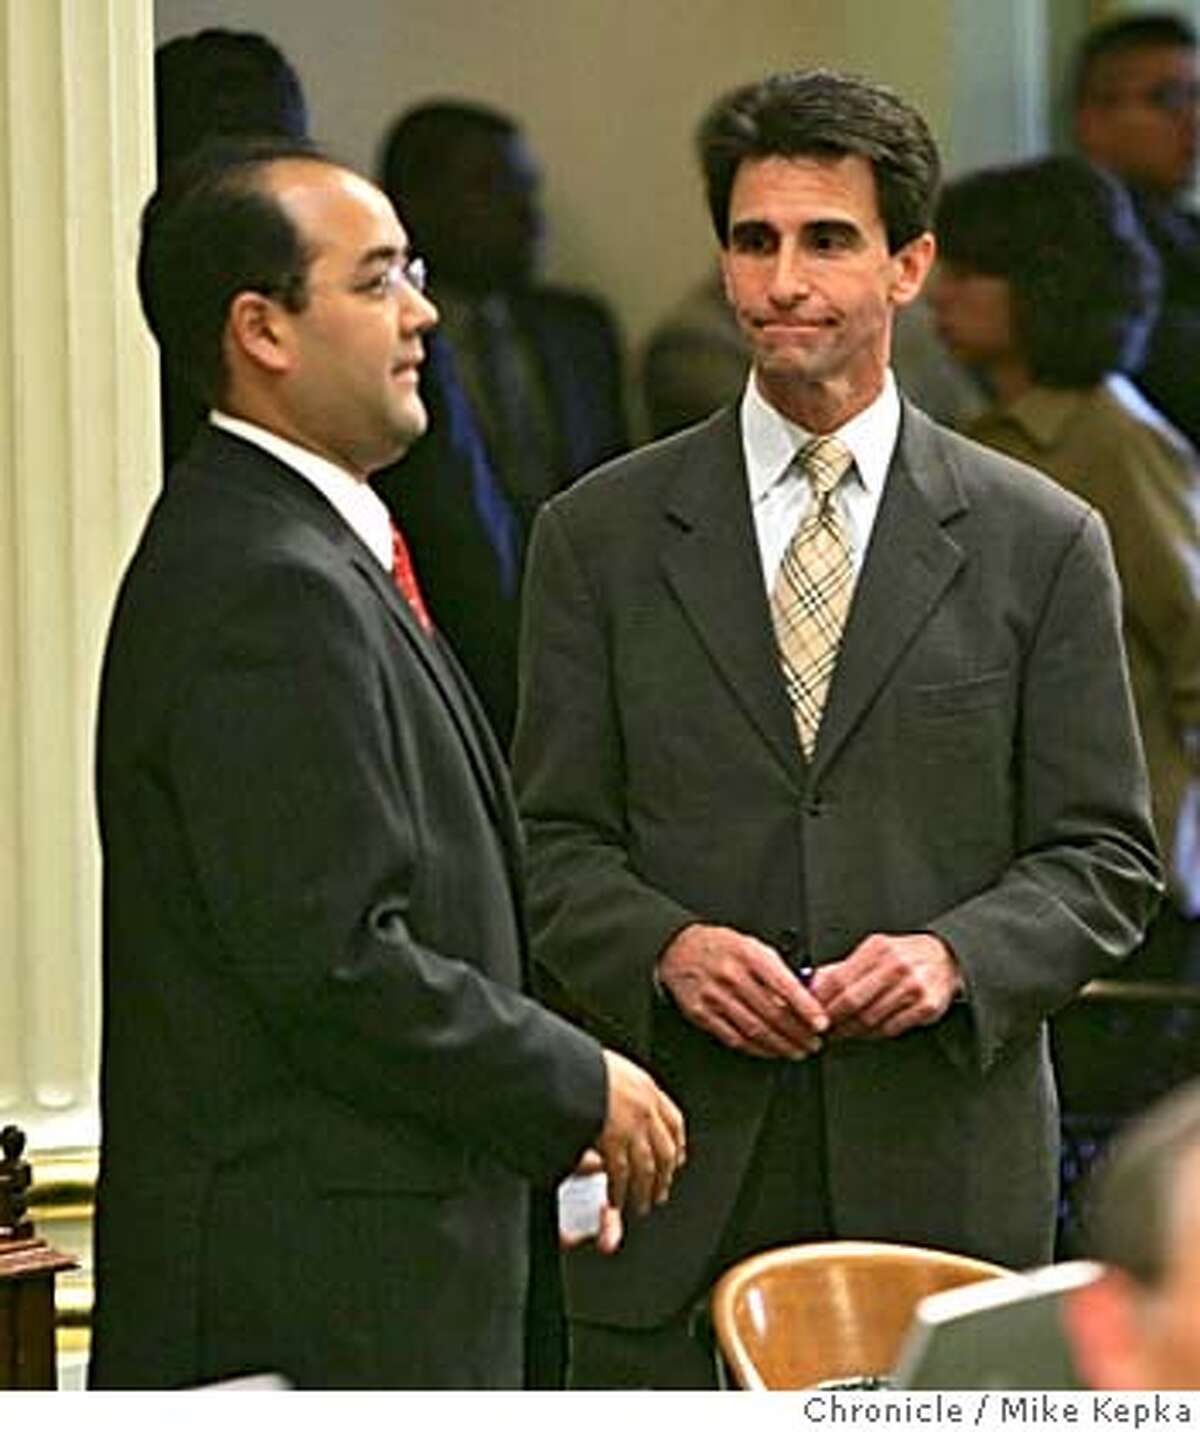 samesex128_mk.jpg Assemblyman Mark Leno (right) passes Alberto Torrico on the floor. Torrico is a major oppponent of the AB19. Assemblyman Mark Leno is making a last attempt to get AB19, otherwise know as the Religeous Freedom and Civil Marriage Protectin Act, passed Wednessday. 6/1/05 Mike Kepka / The Chronicle MANDATORY CREDIT FOR PHOTOG AND SF CHRONICLE/ -MAGS OUT